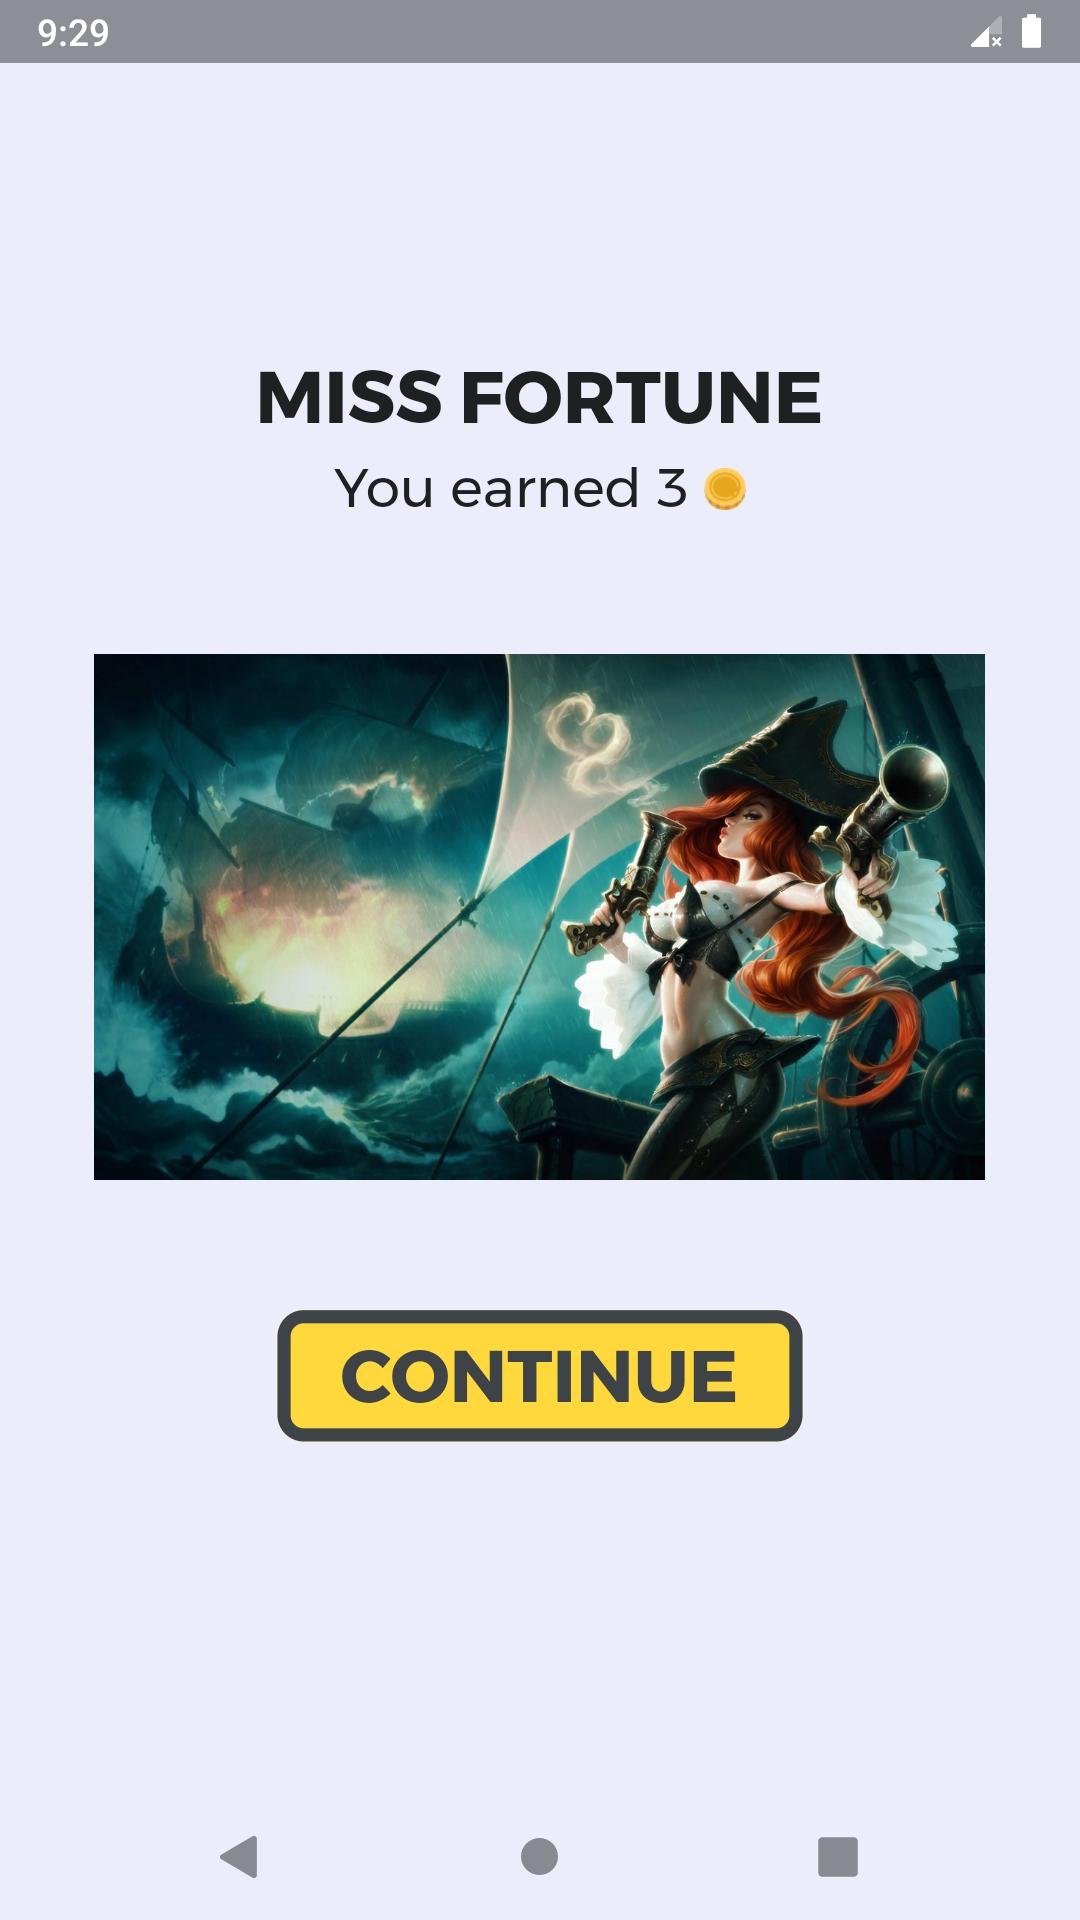 Guess the LoL Champion - League of Legends Quiz for Android - APK Download